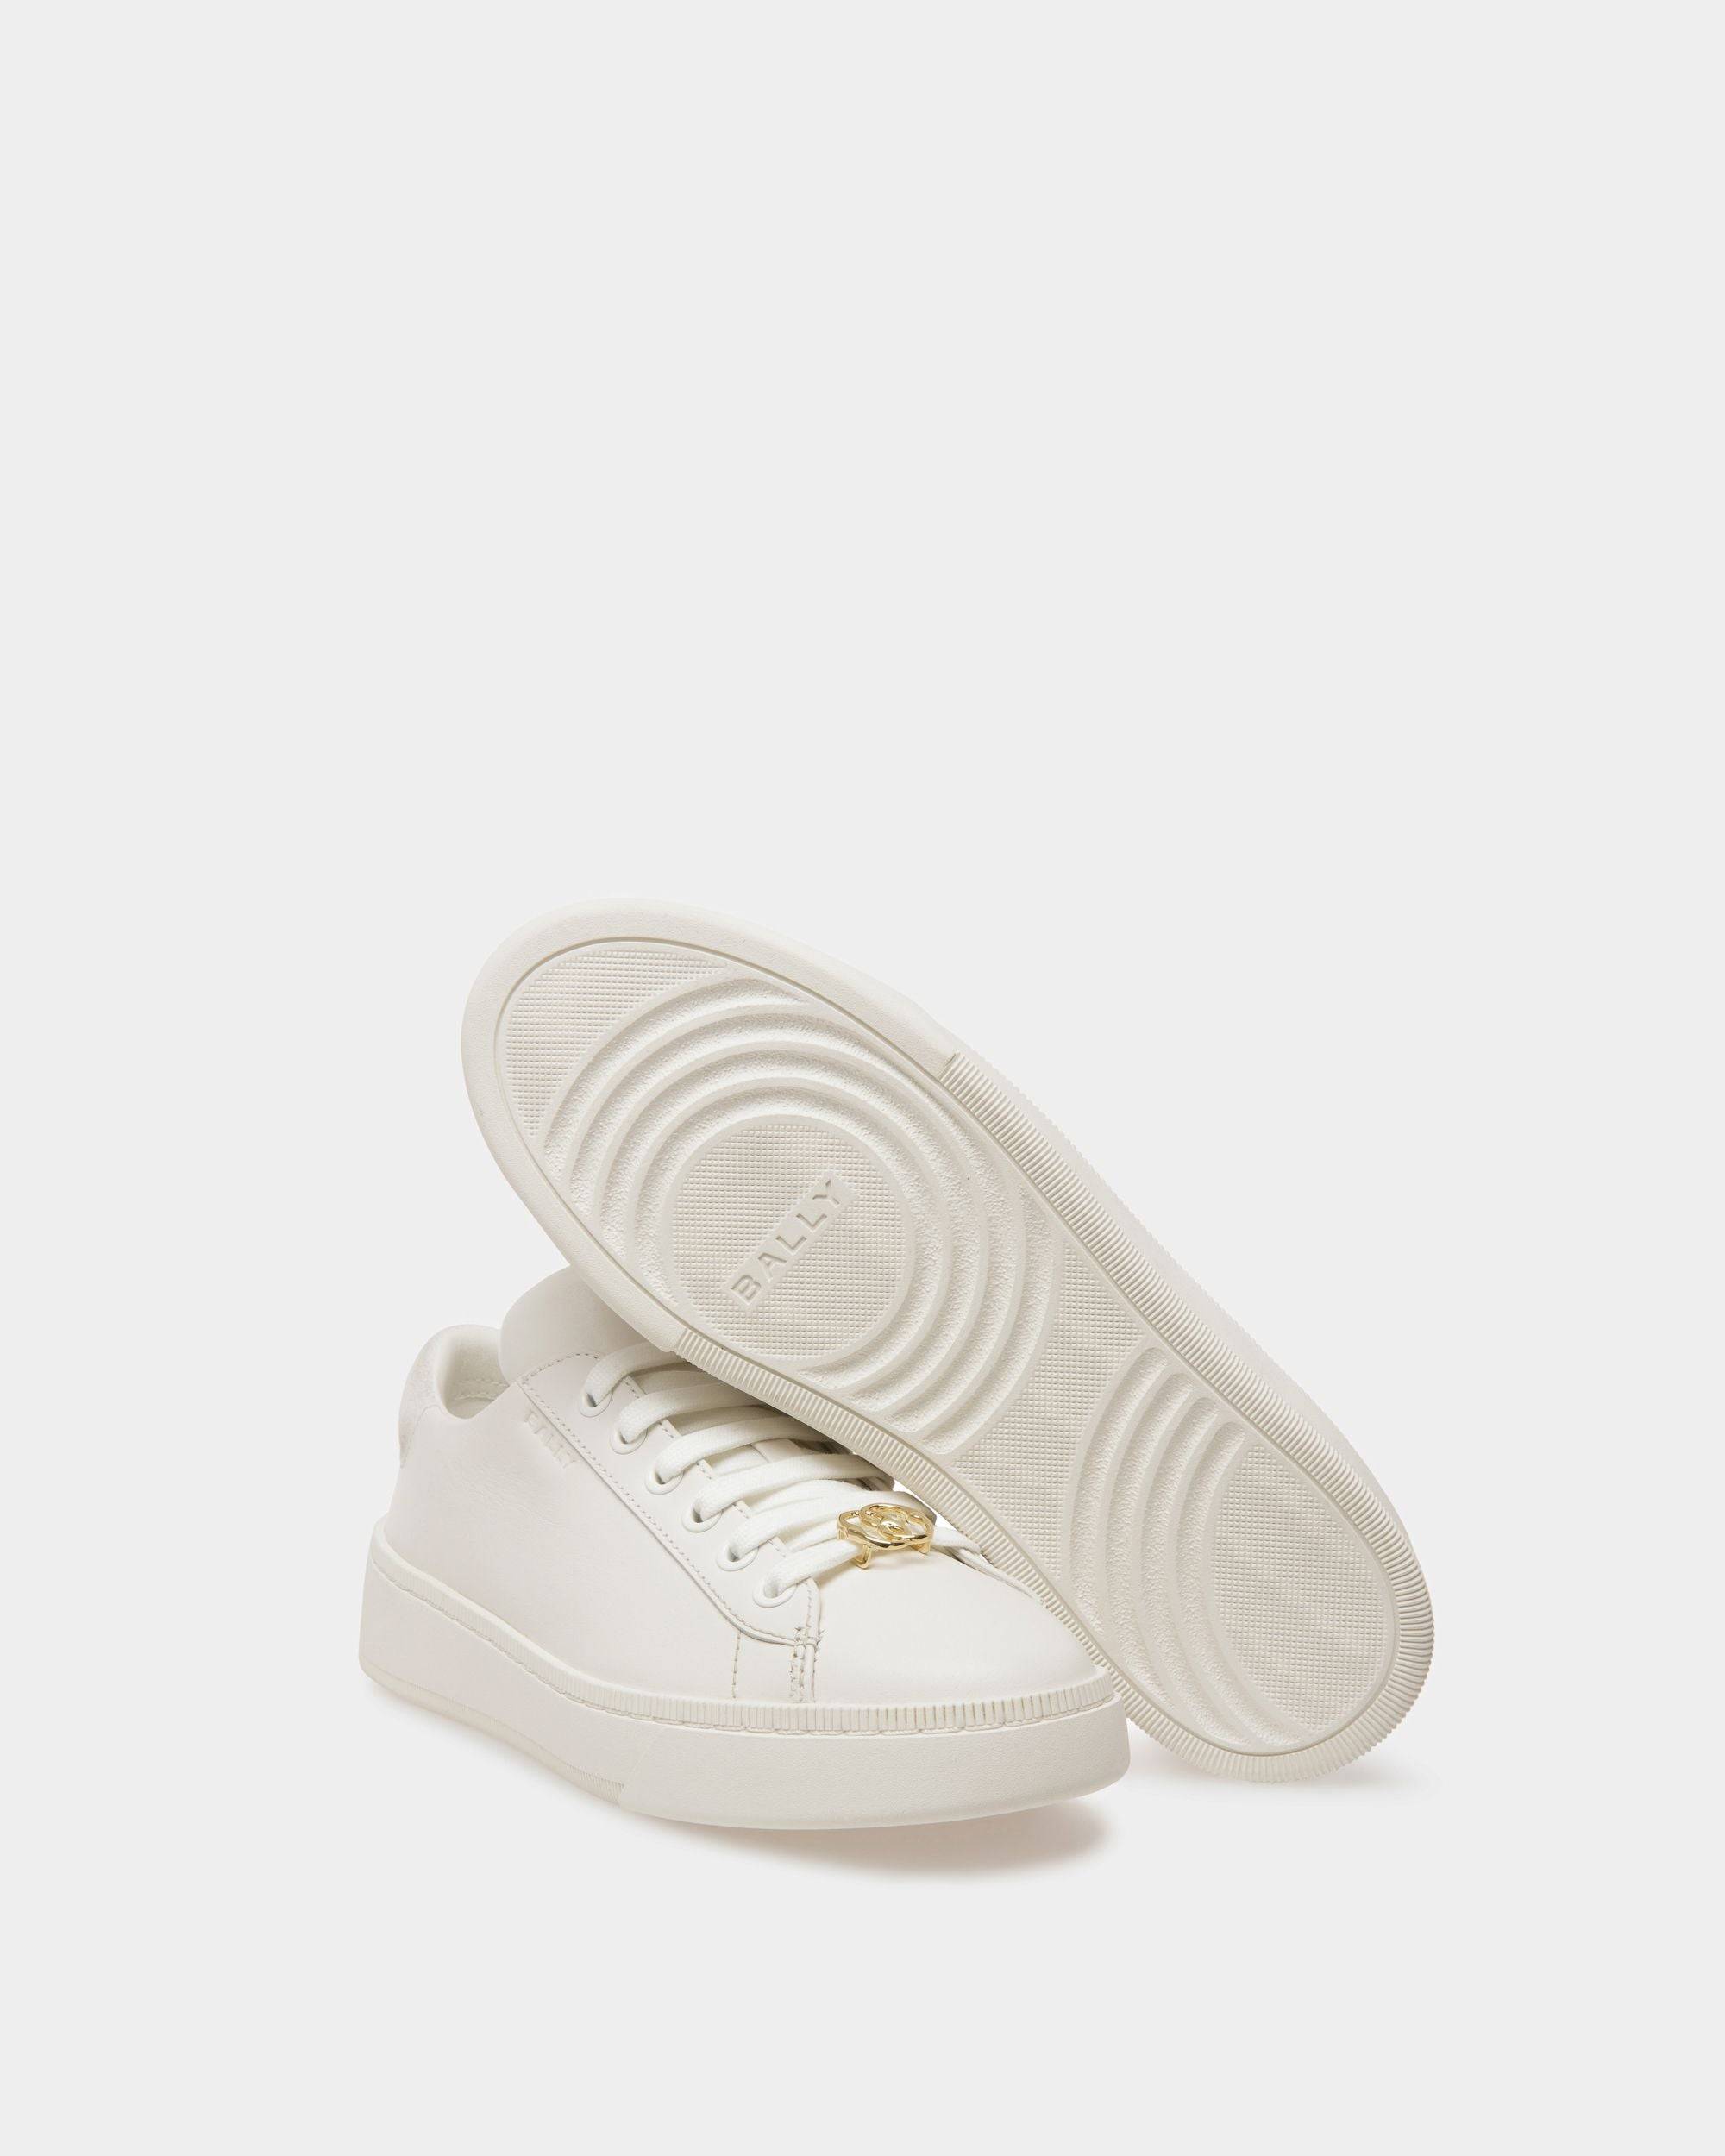 Ryver | Women's Sneakers | White Leather | Bally | Still Life Below